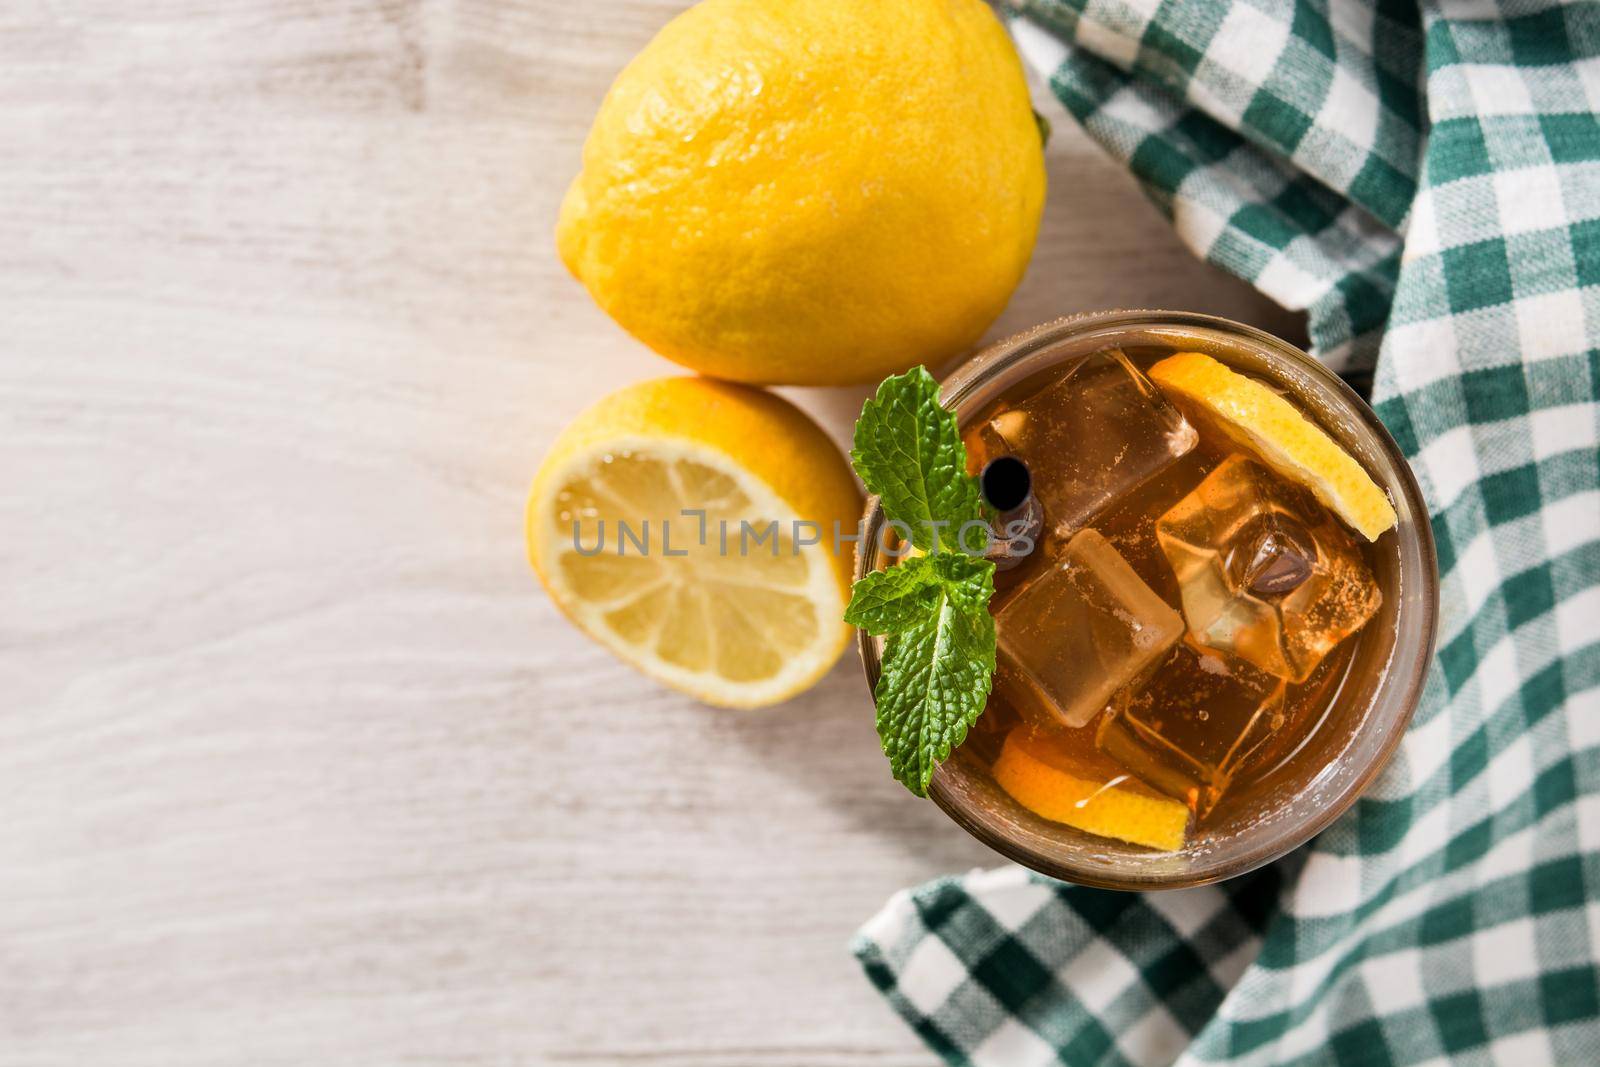 Iced tea drink with lemon in glass and ice by chandlervid85